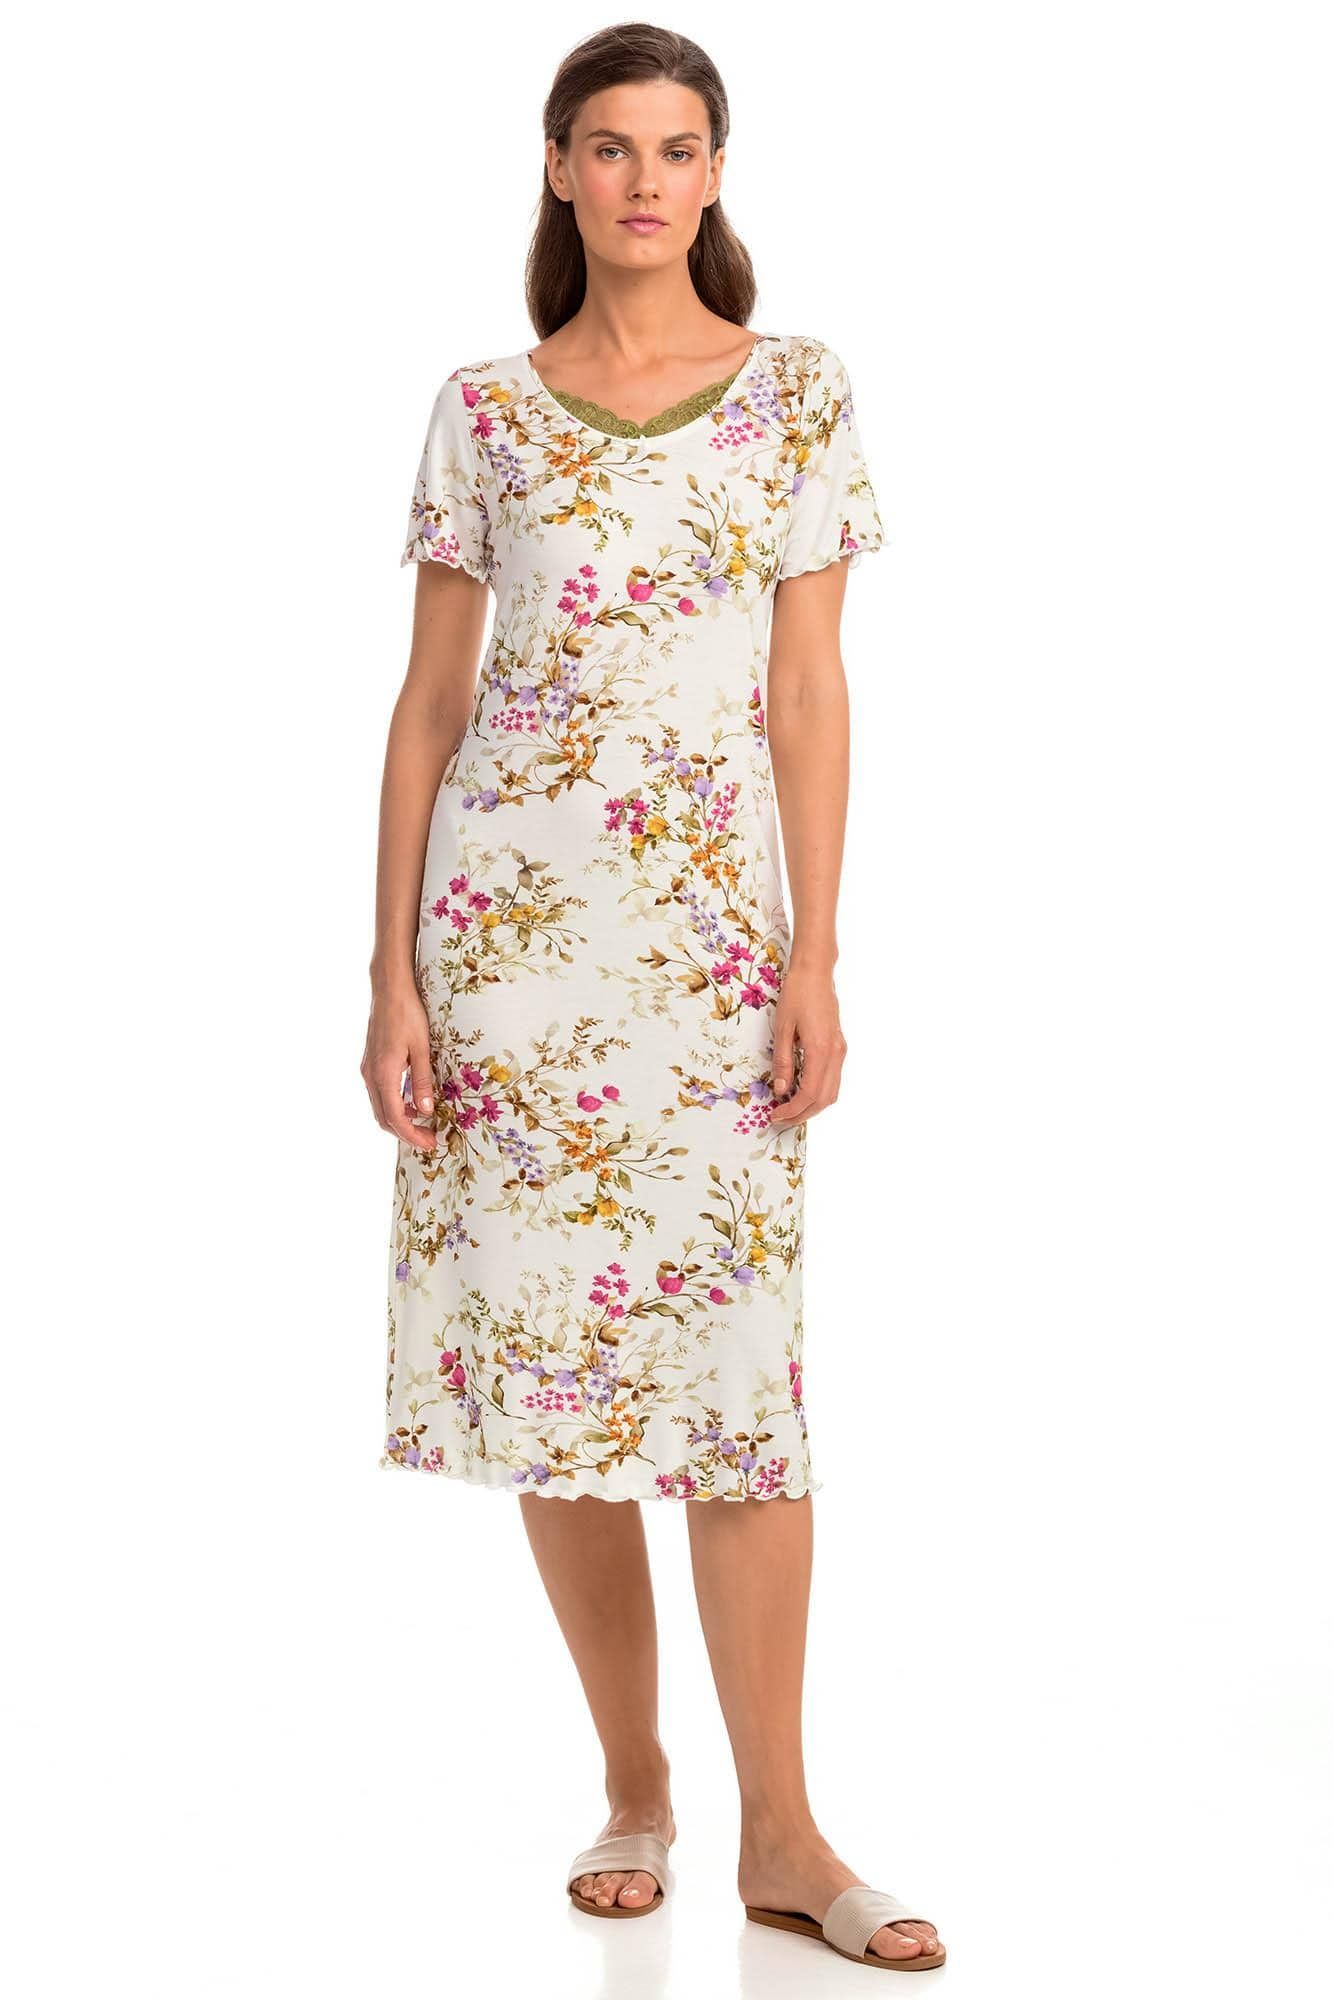 Floral Nightgown with Lace Details